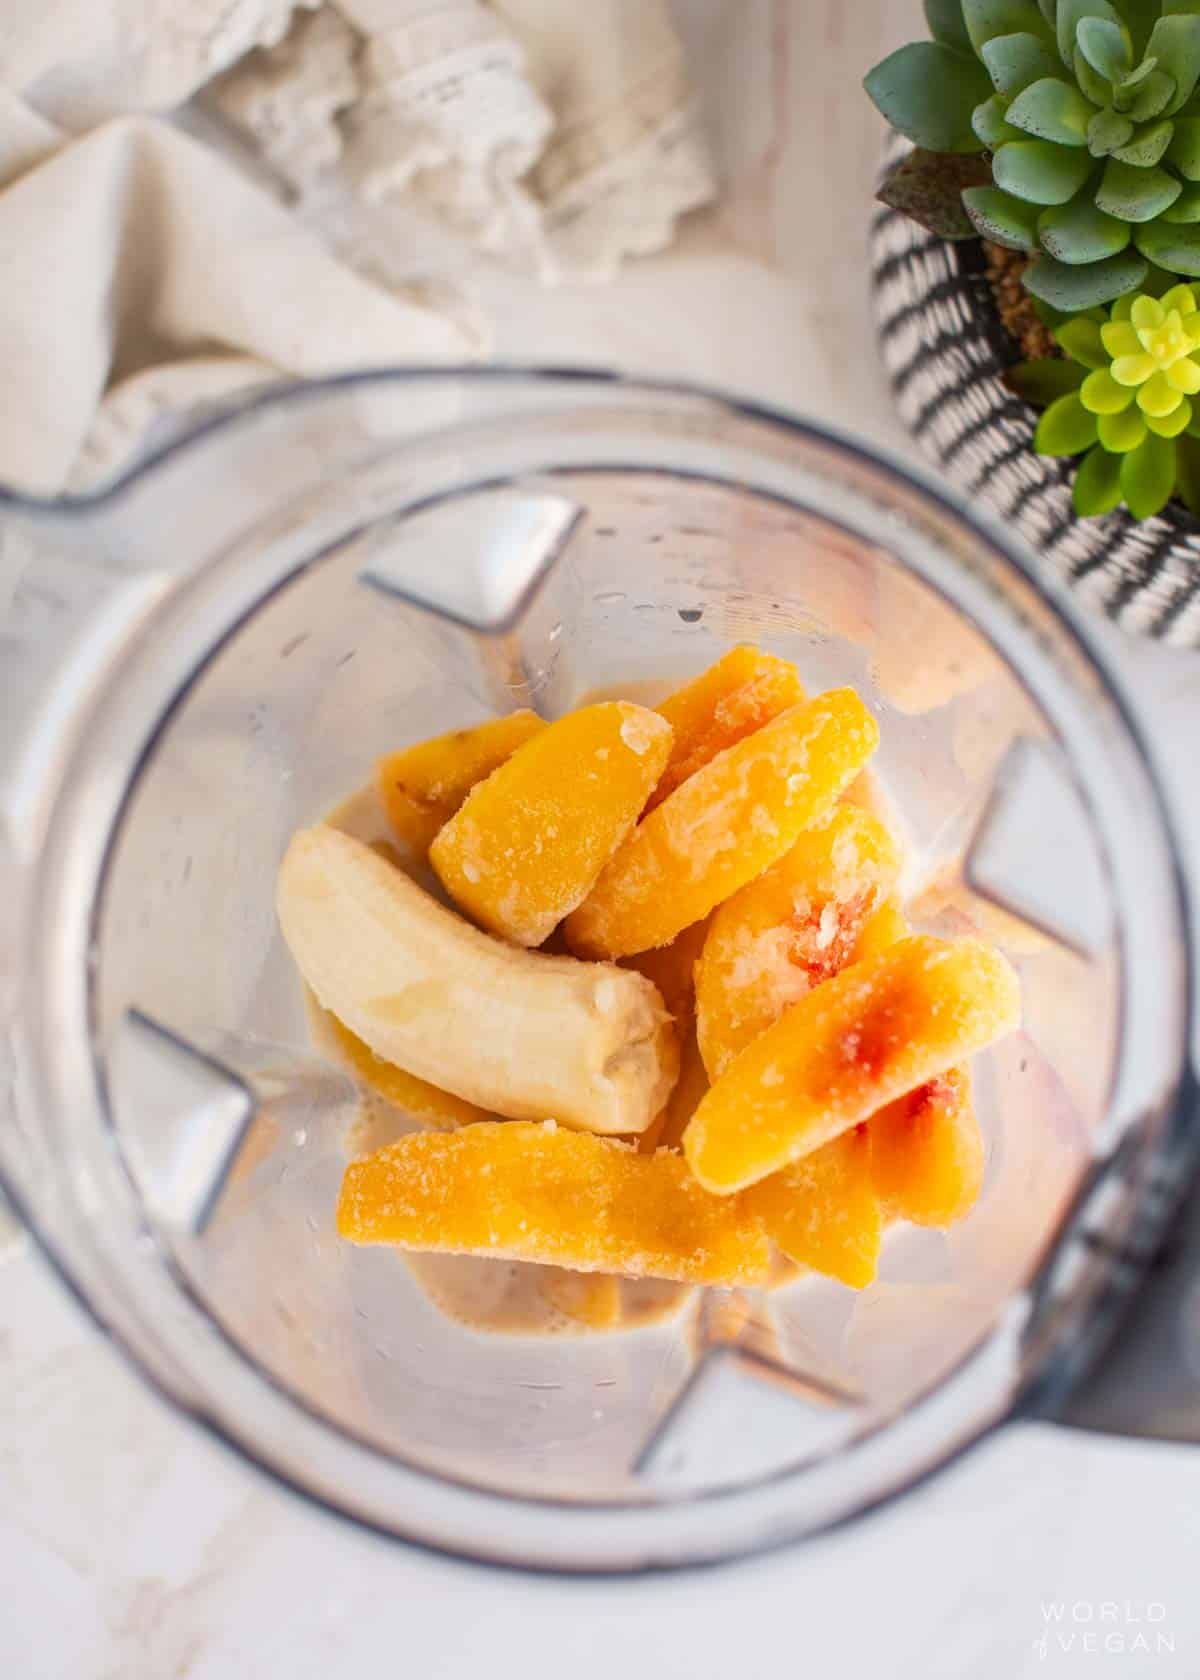 Ingredients for this banana peach smoothie added to a blender pitcher.